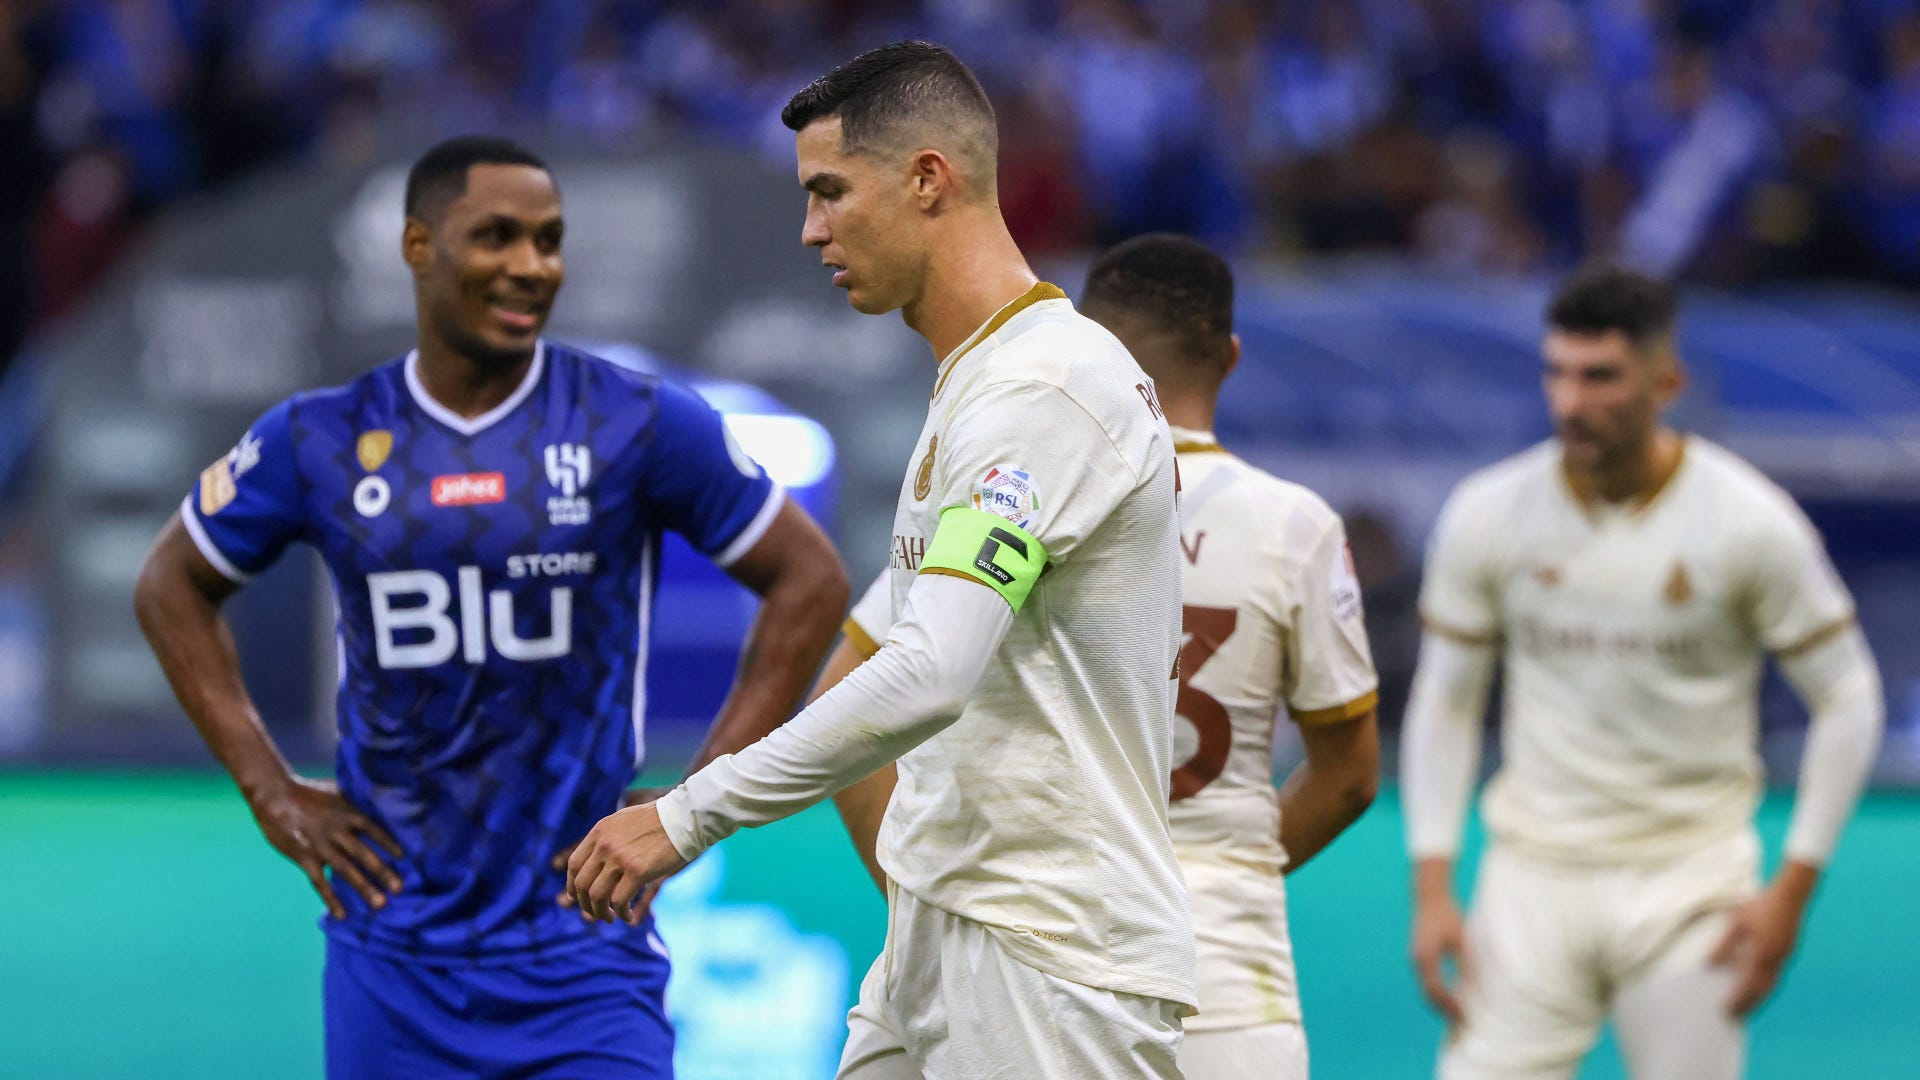 WATCH Cristiano Ronaldo booked after taking out AlHilal player with